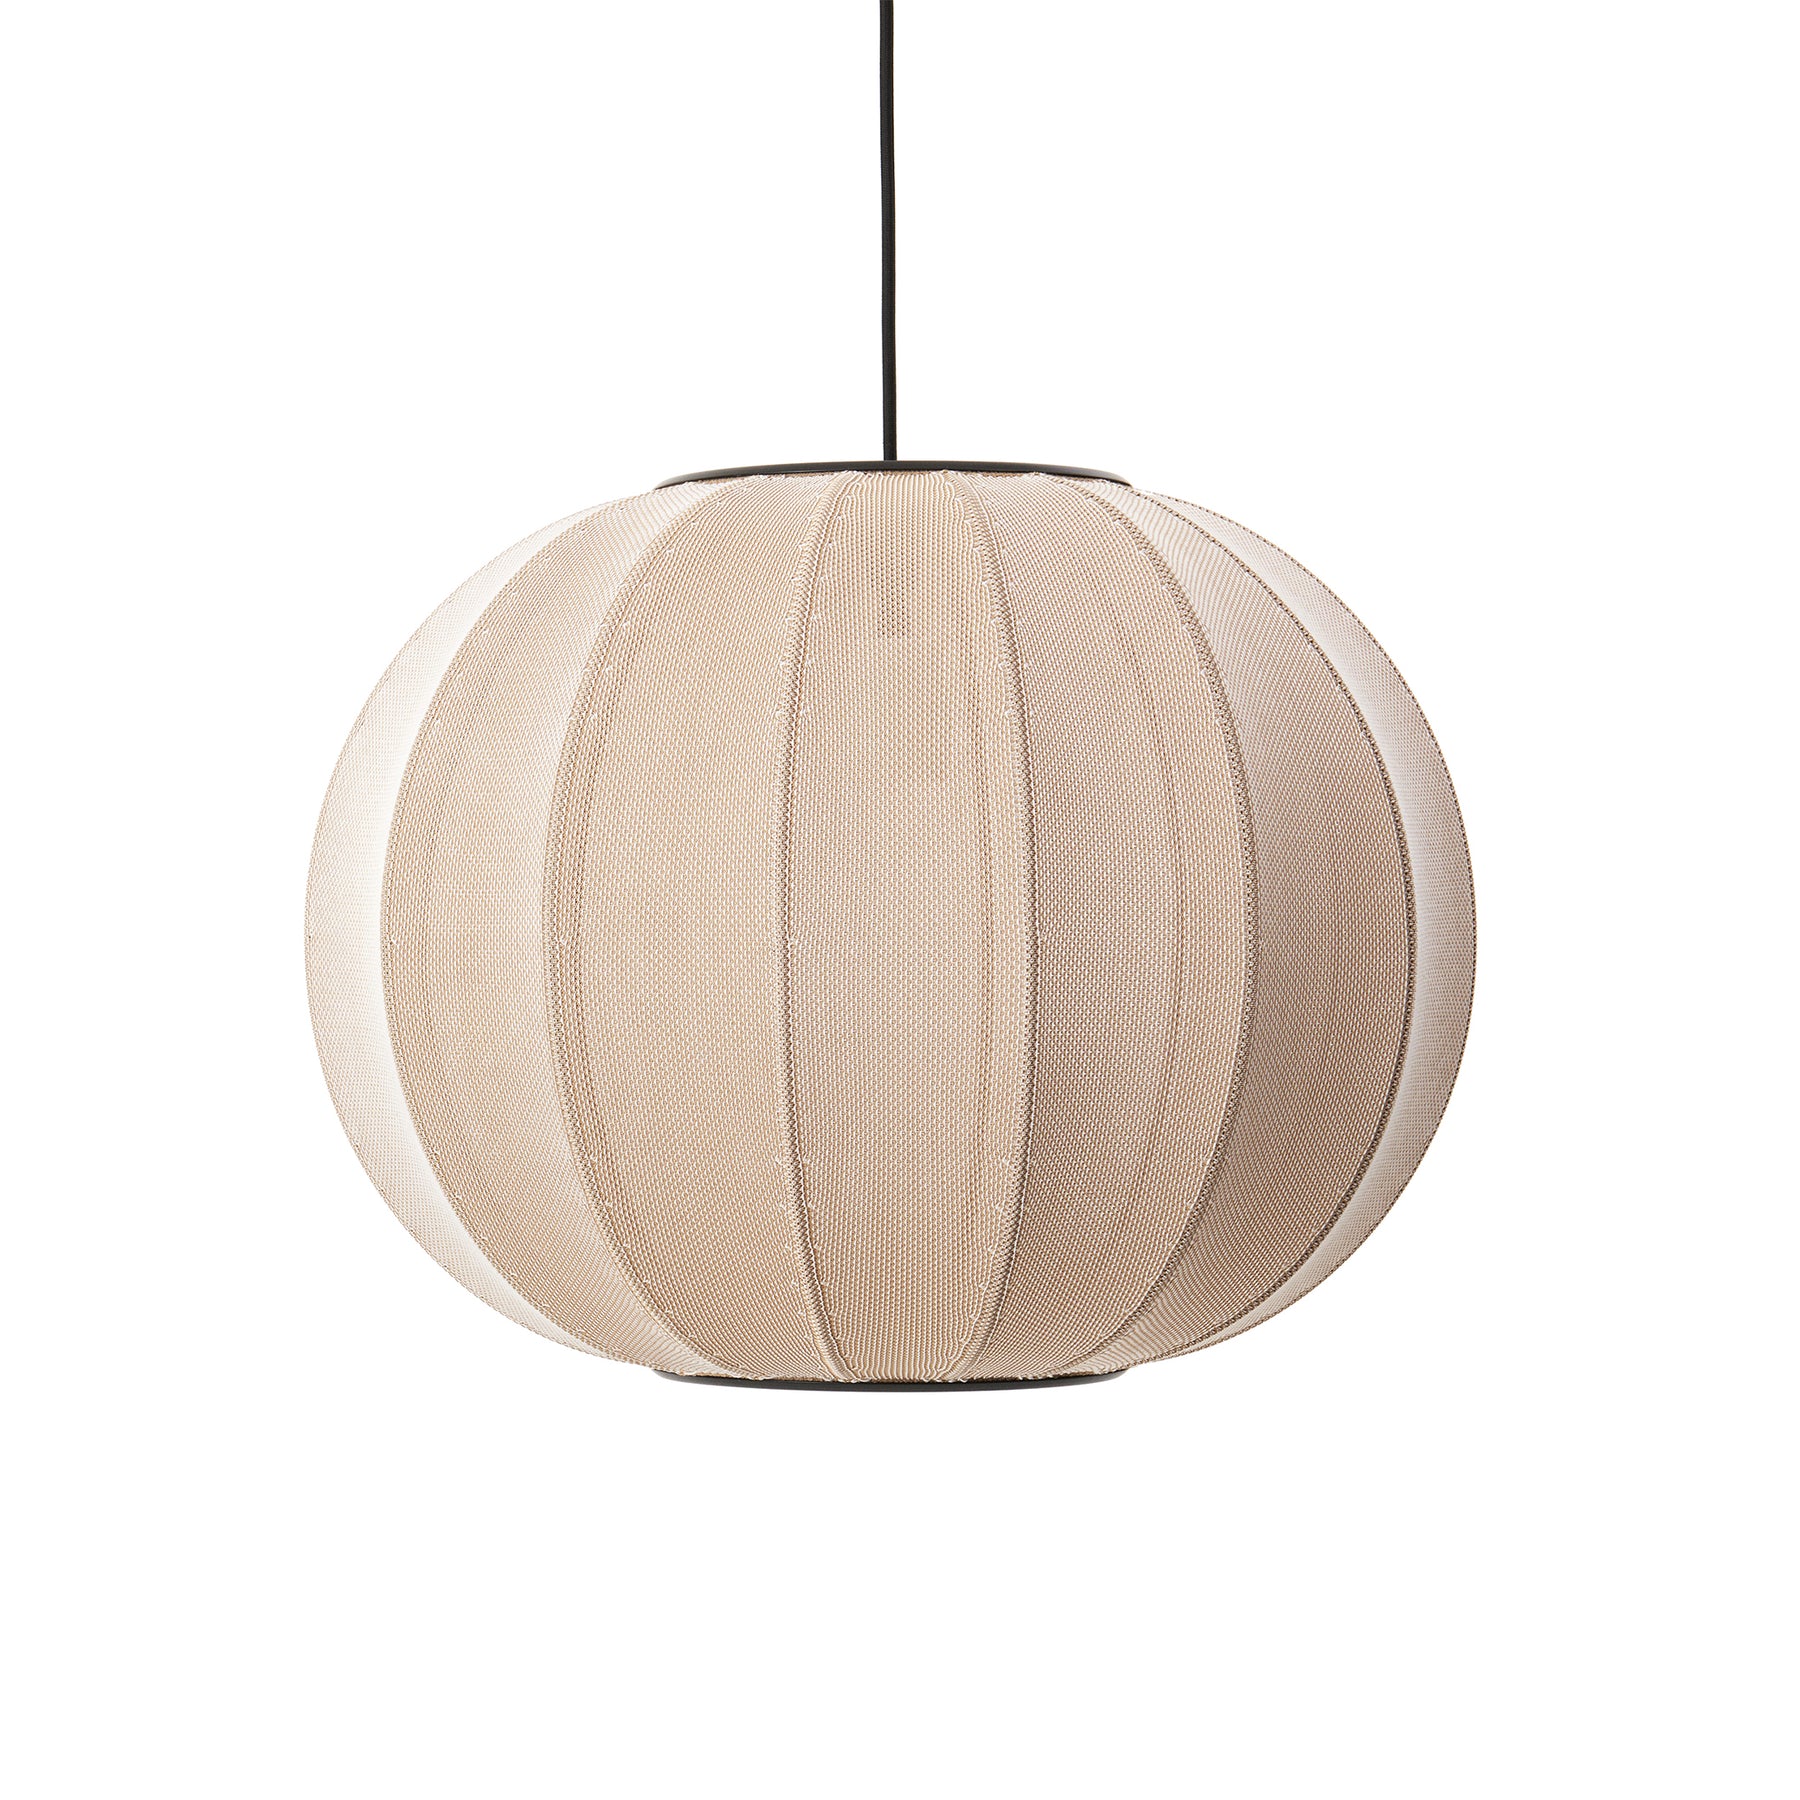 Fremsyn krig Anzai AMEICO - Official US Distributor of Made by Hand - Knit-Wit Pendant Lamp 45